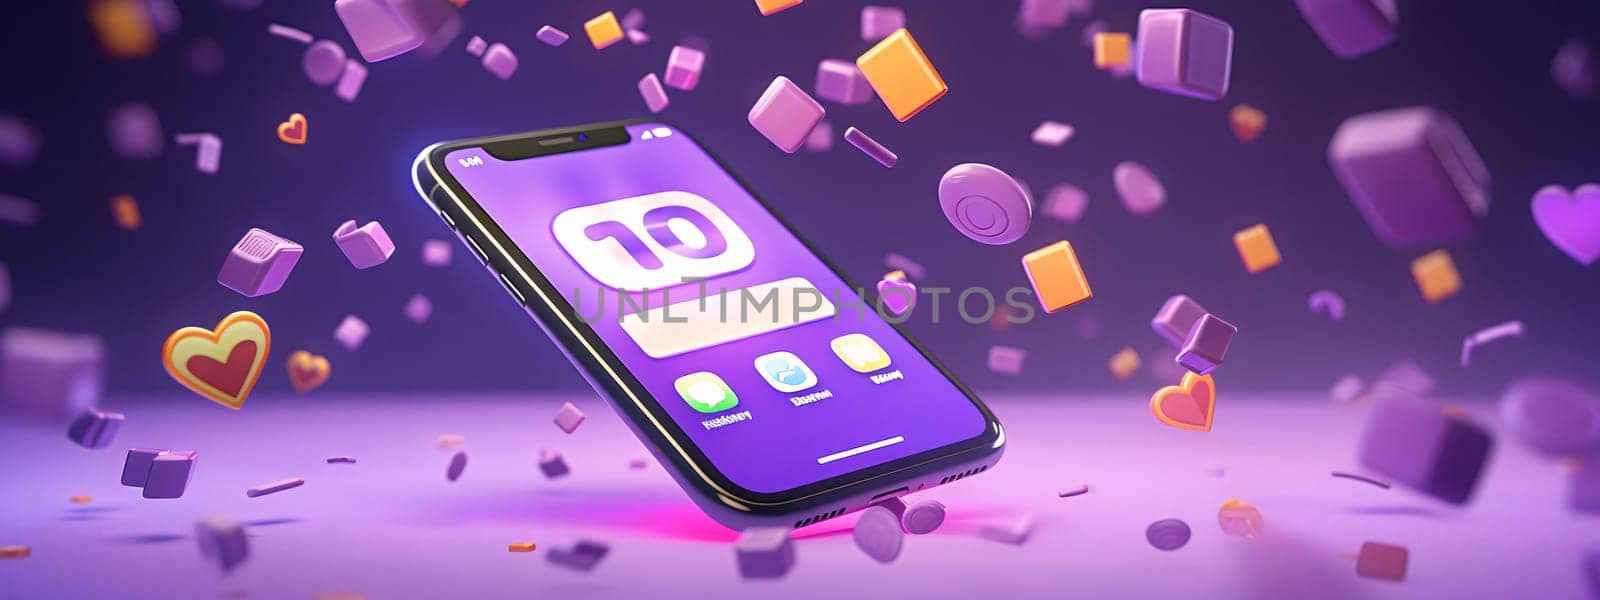 Smartphone screen: 3d render of a smartphone with social media icons on the screen